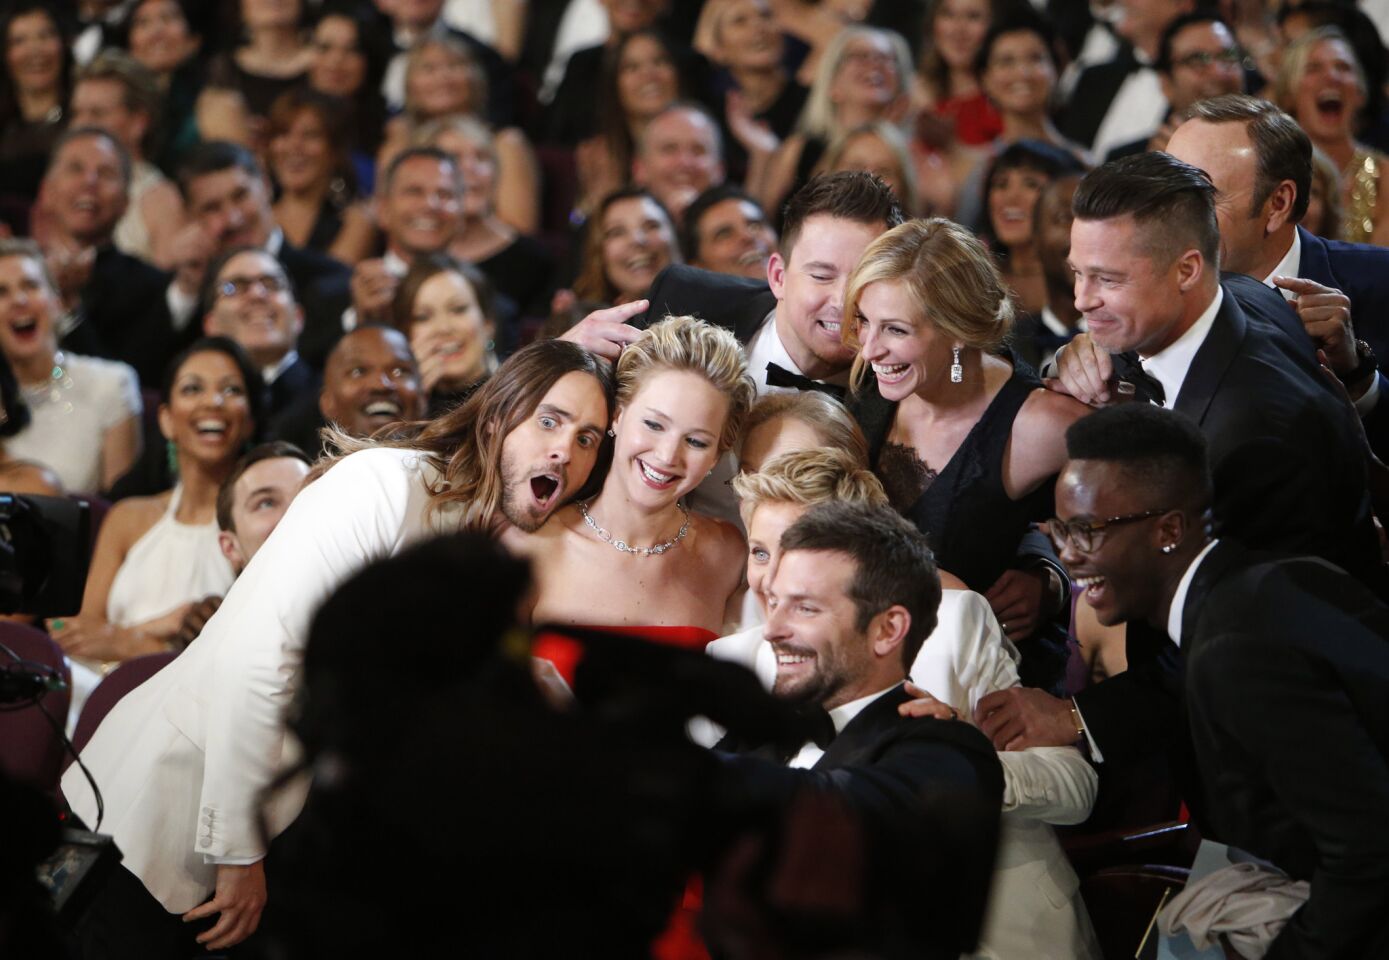 Ellen DeGeneres gathers members from the audience for a selfie at the 86th Annual Academy Awards on Sunday, March 2, 2014, at the Dolby Theatre in Hollywood.